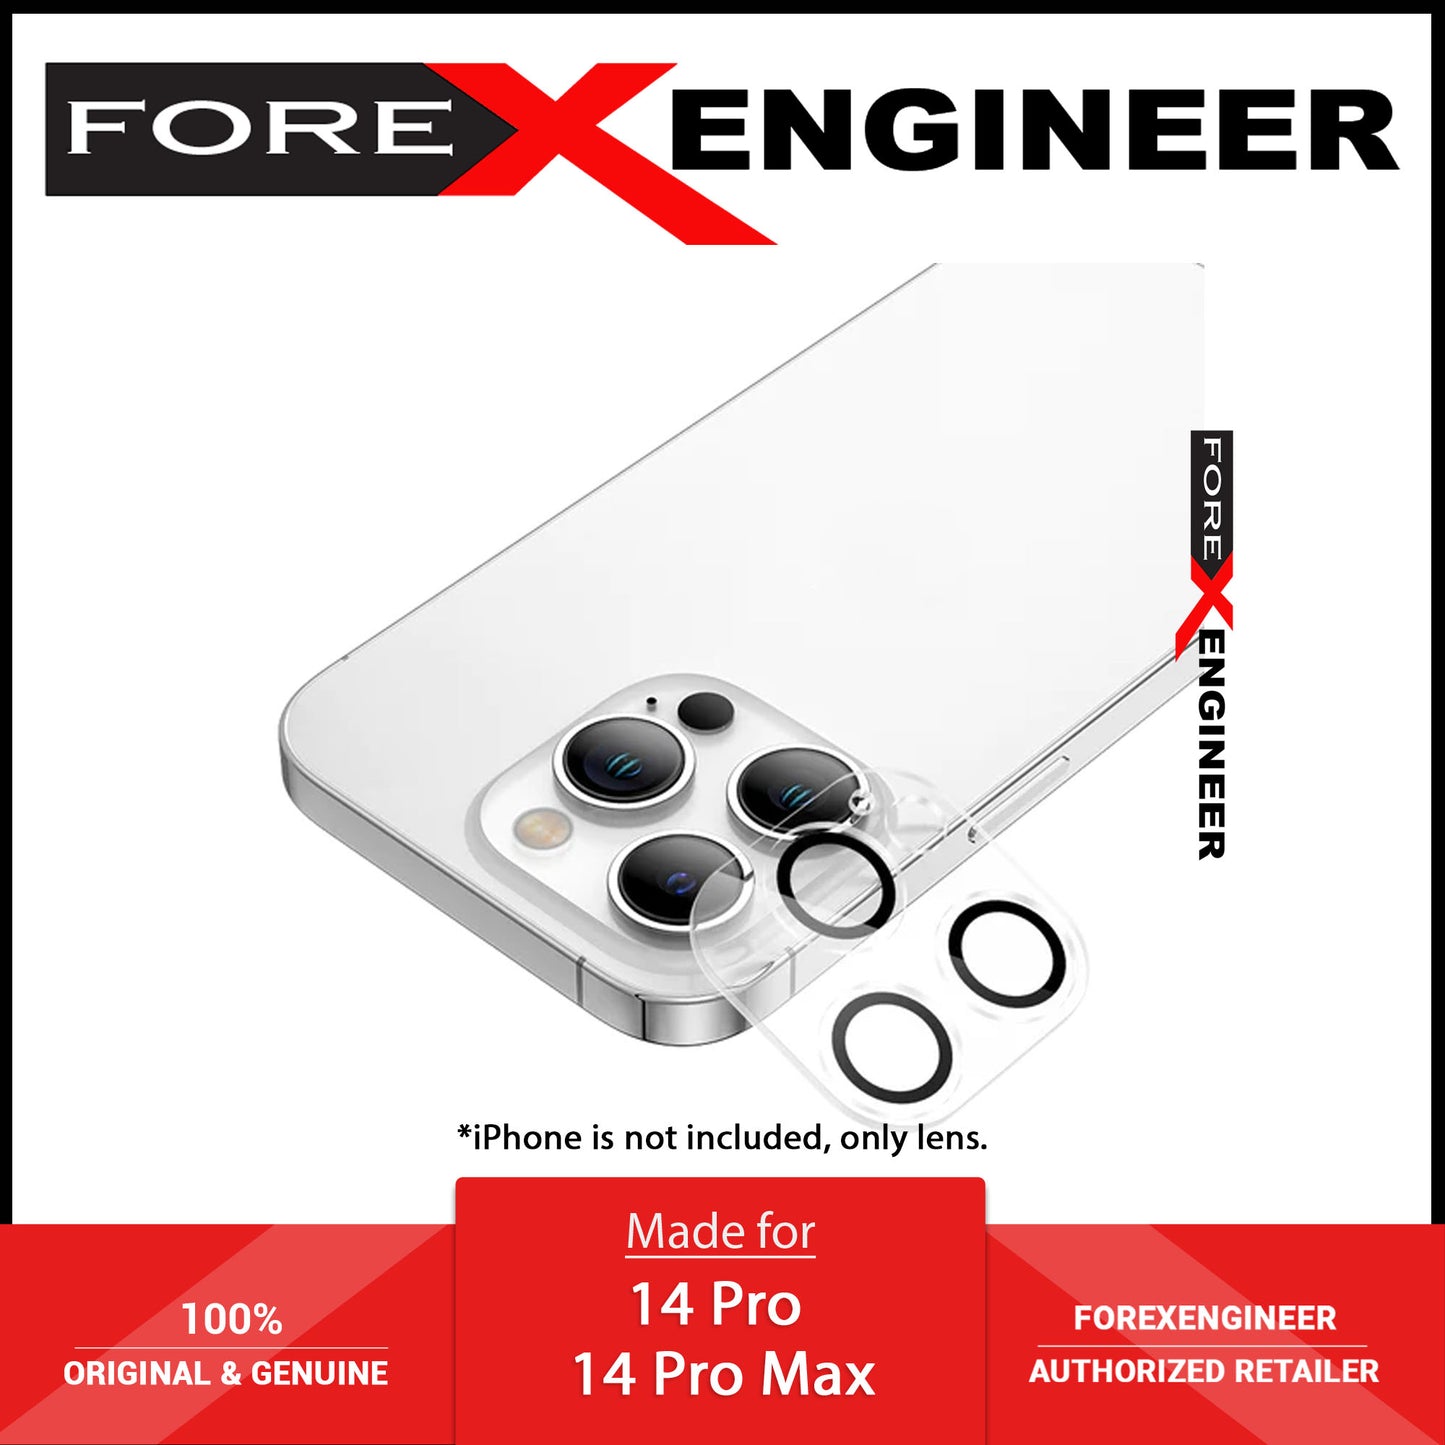 AMAZINGthing Pure Lens Glass Protector for iPhone 14 Pro Max - 14 Pro (Three Lens) - Clear (Barcode: 4892878076135 )